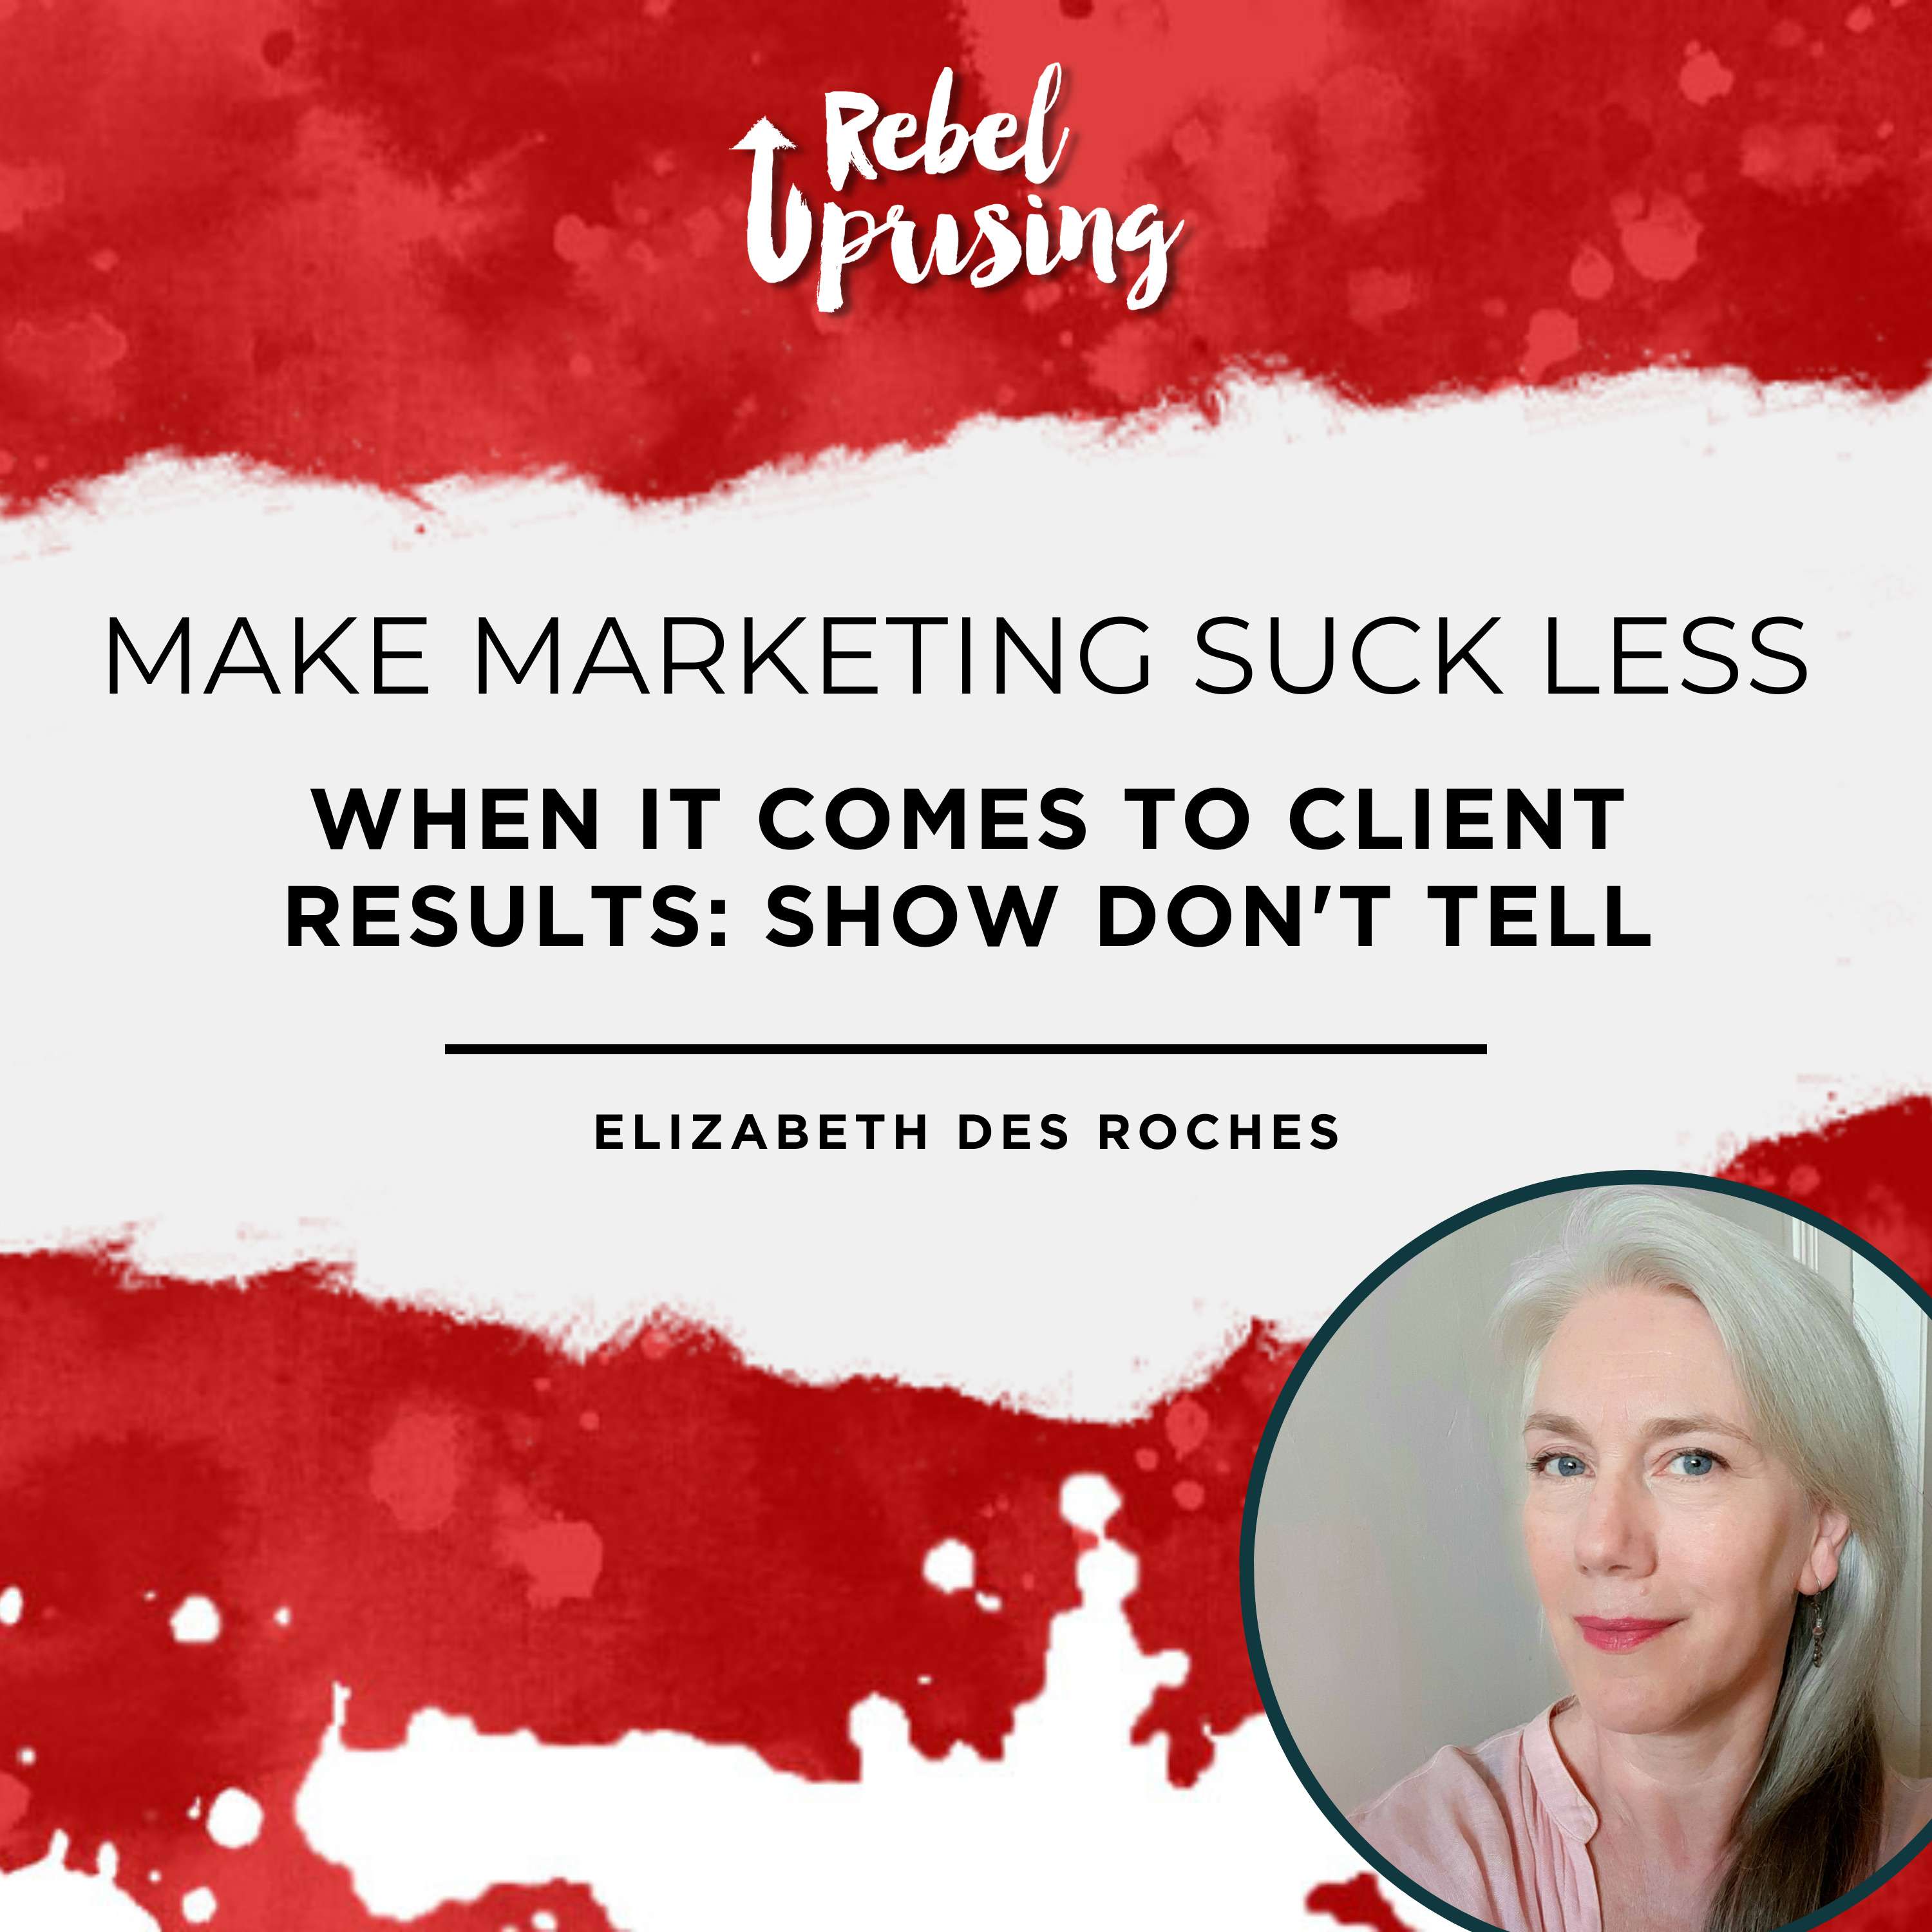 [MMSL] When It Comes to Client Results: Show Don't Tell with Elizabeth des Roches